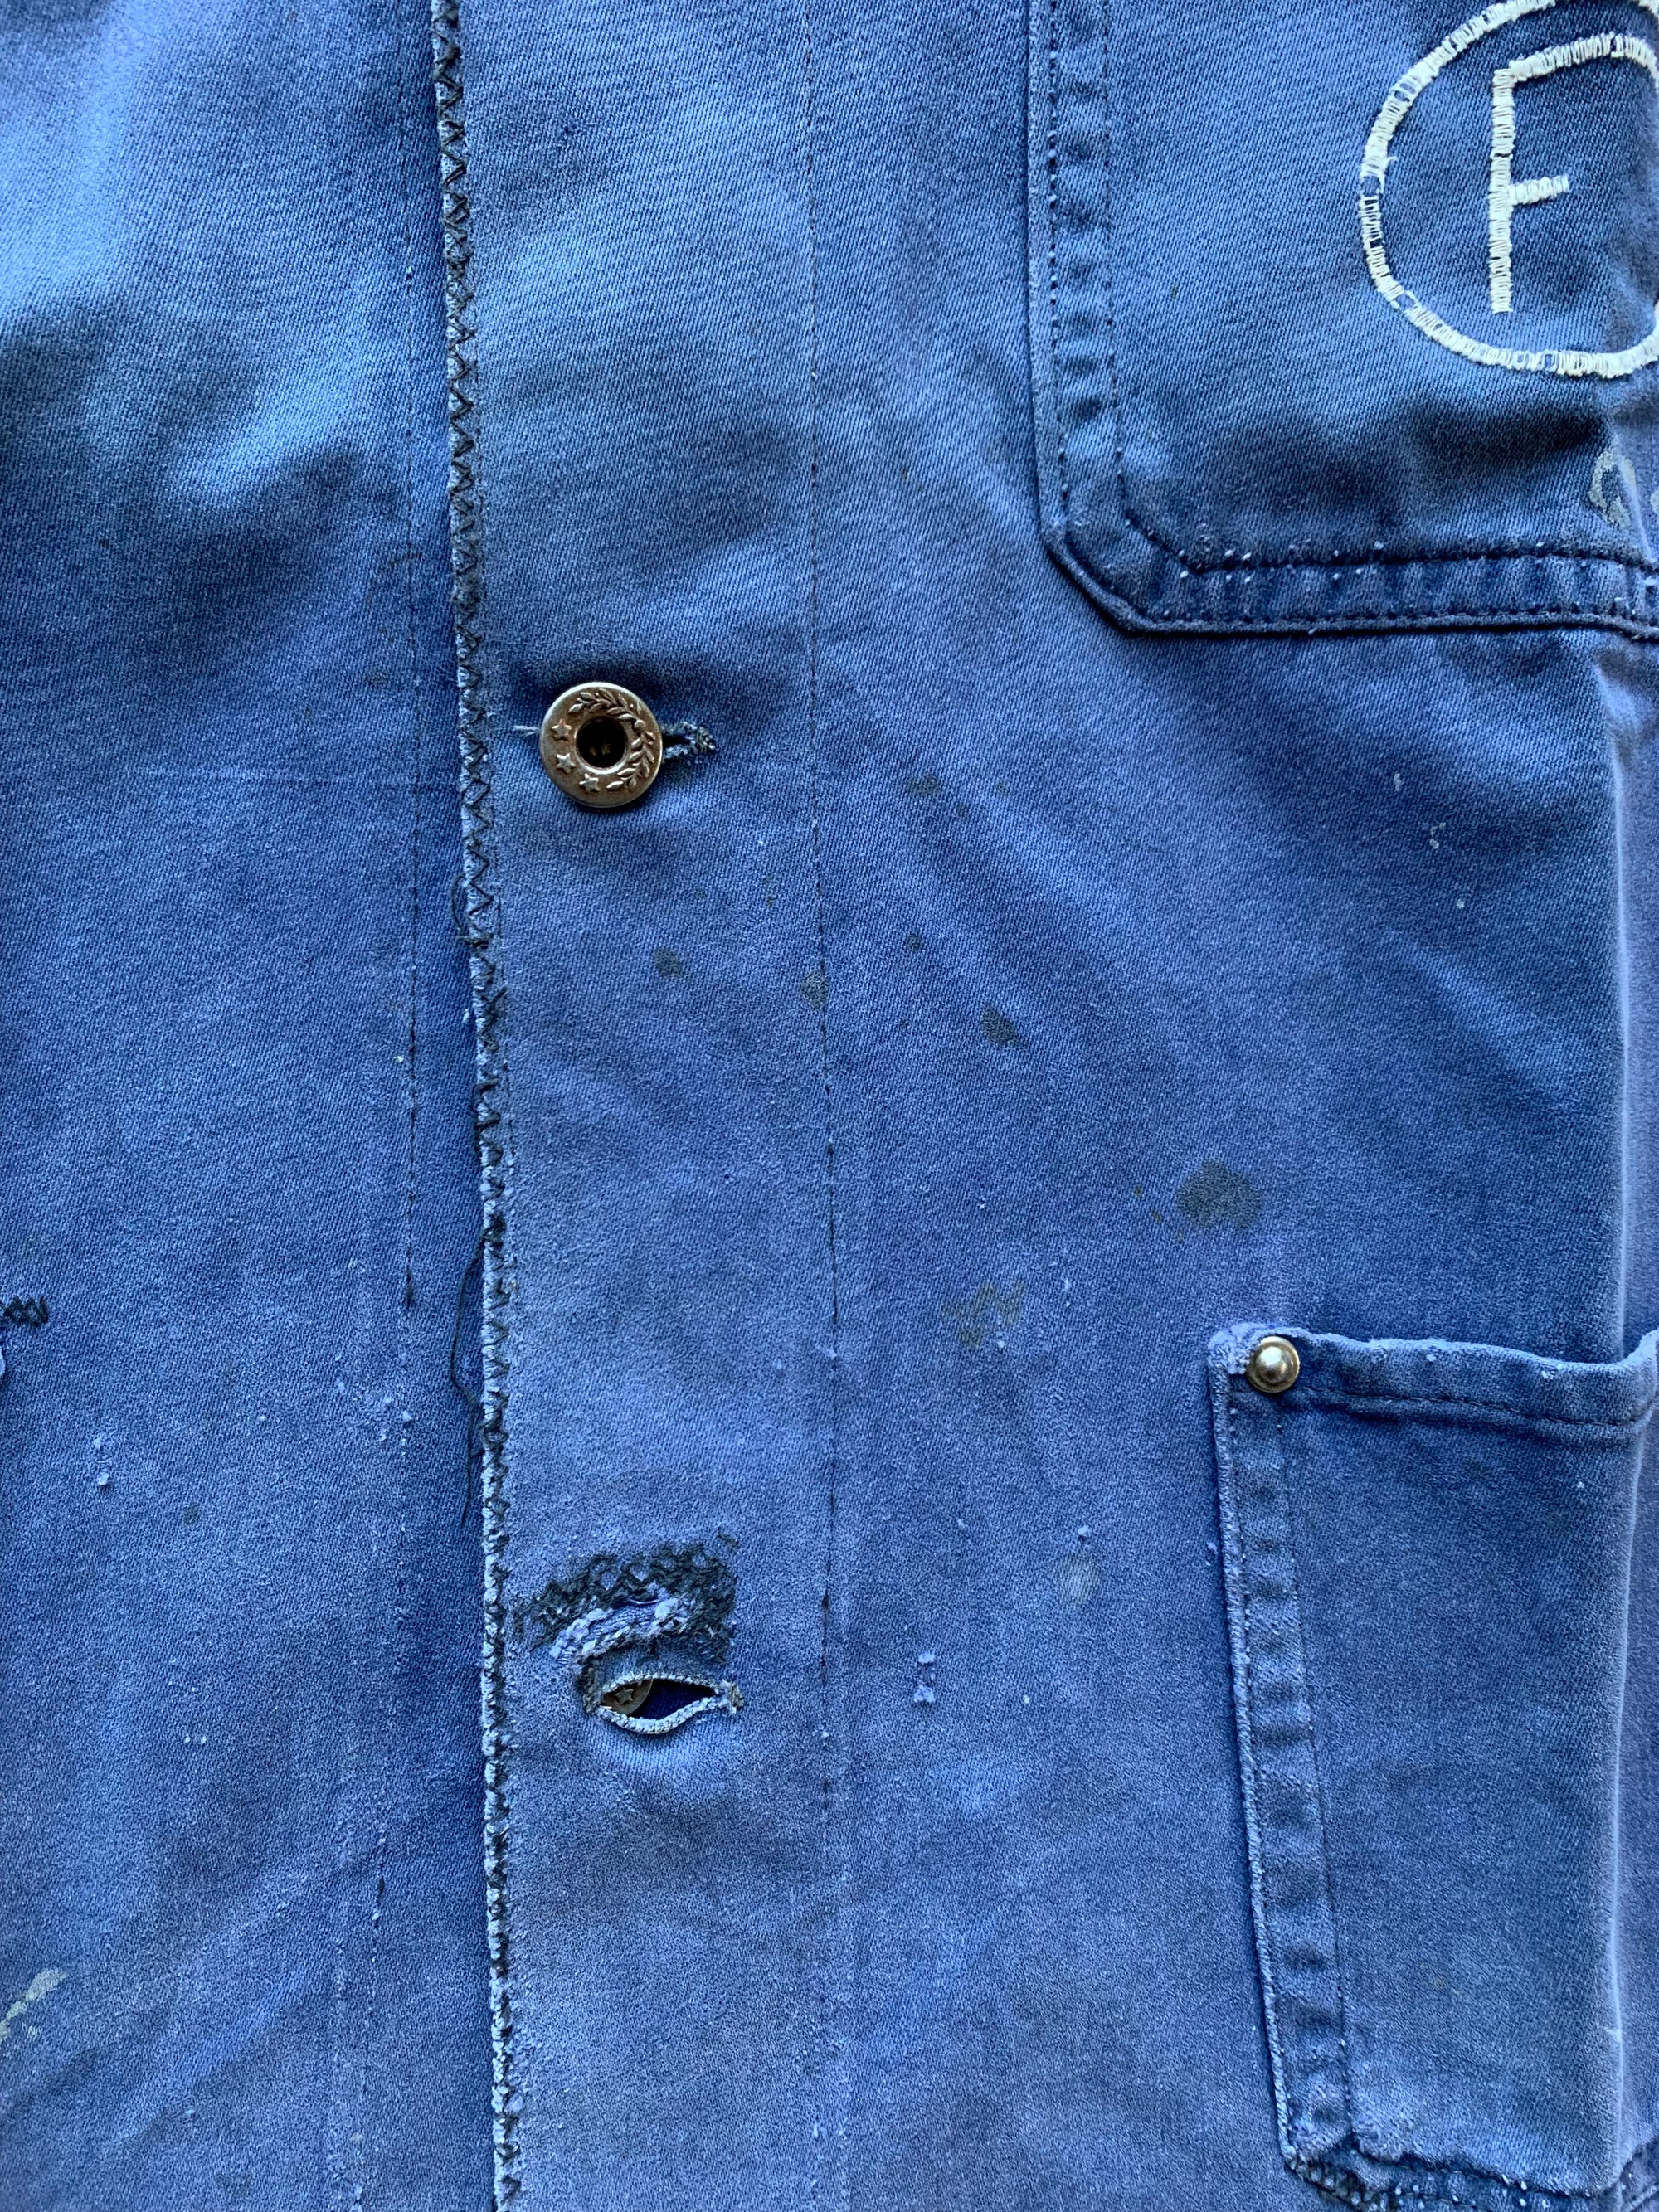 Vintage Blue Chore Coat with Handsewn "F"